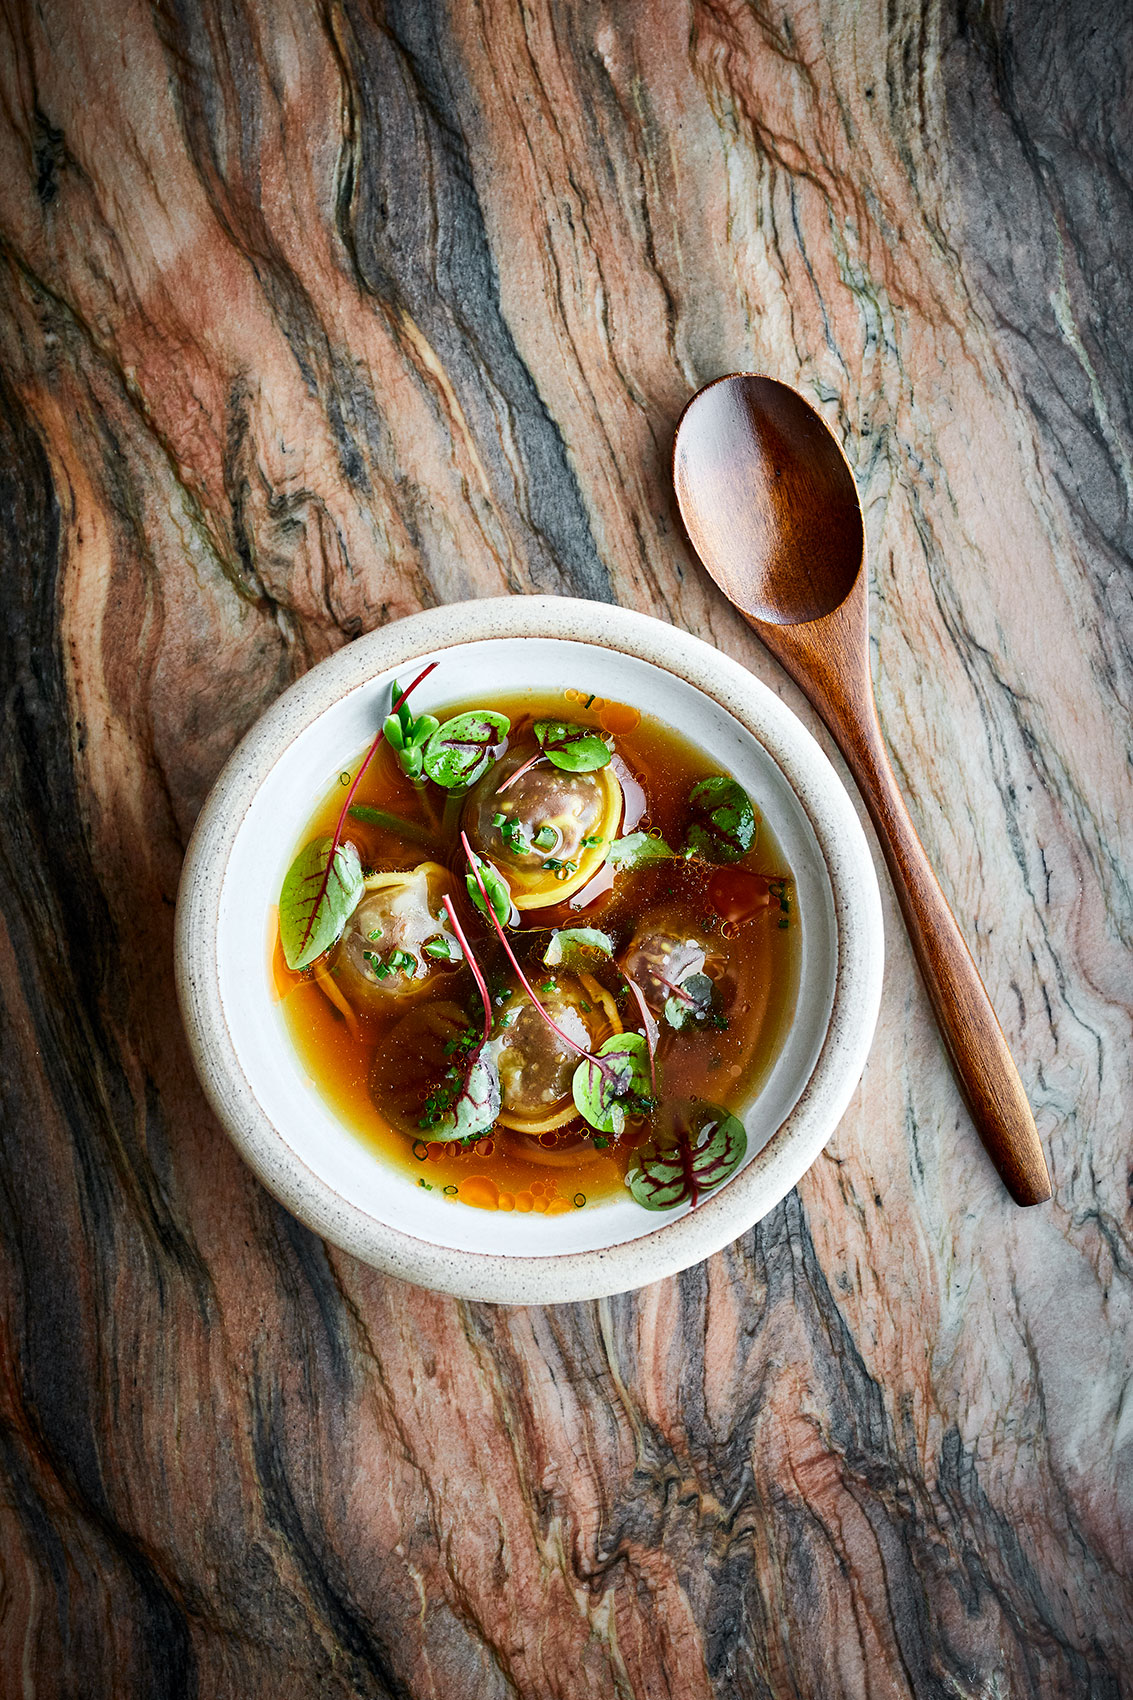 Ahi Crayfish Soup with Wooden Spoon • Hospitality & Culinary Food Photography